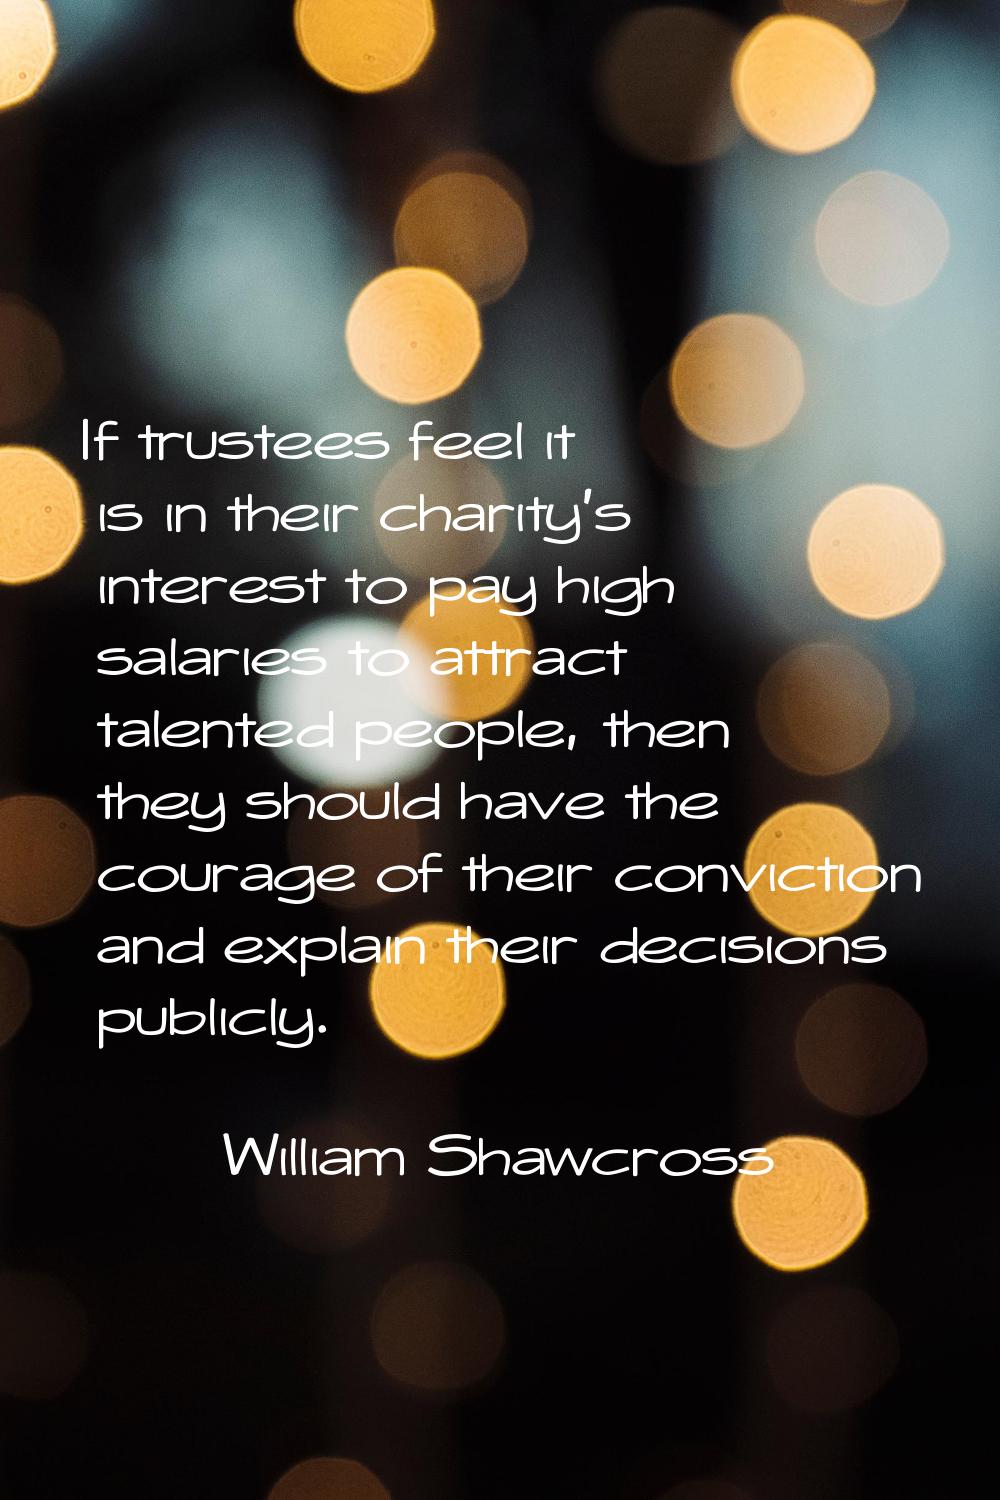 If trustees feel it is in their charity's interest to pay high salaries to attract talented people,